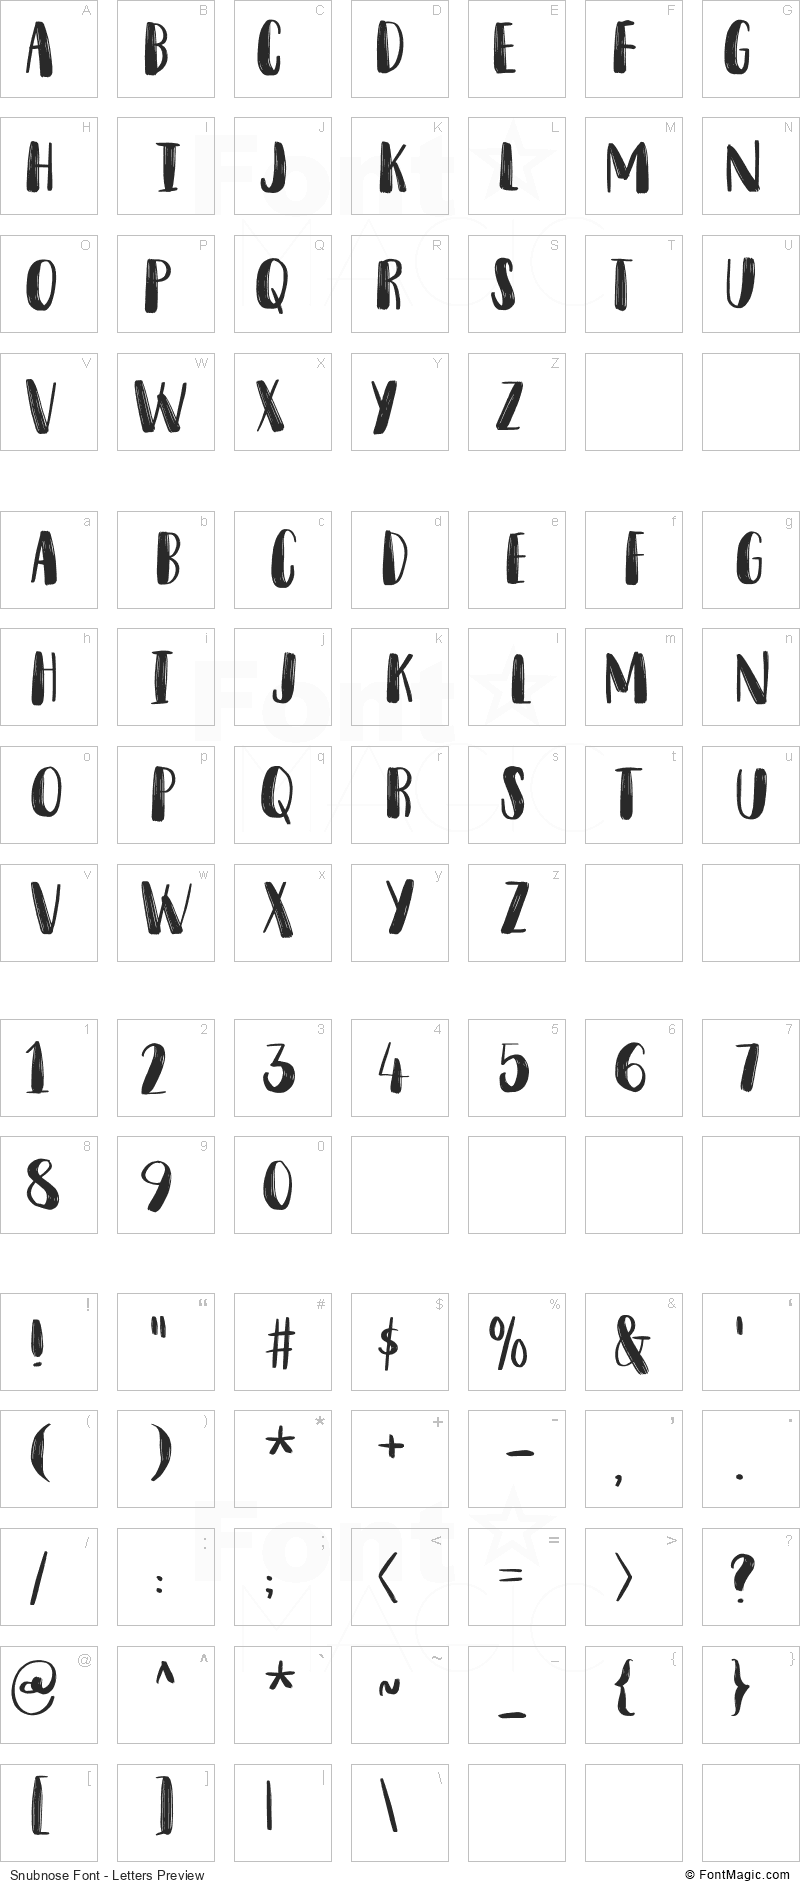 Snubnose Font - All Latters Preview Chart